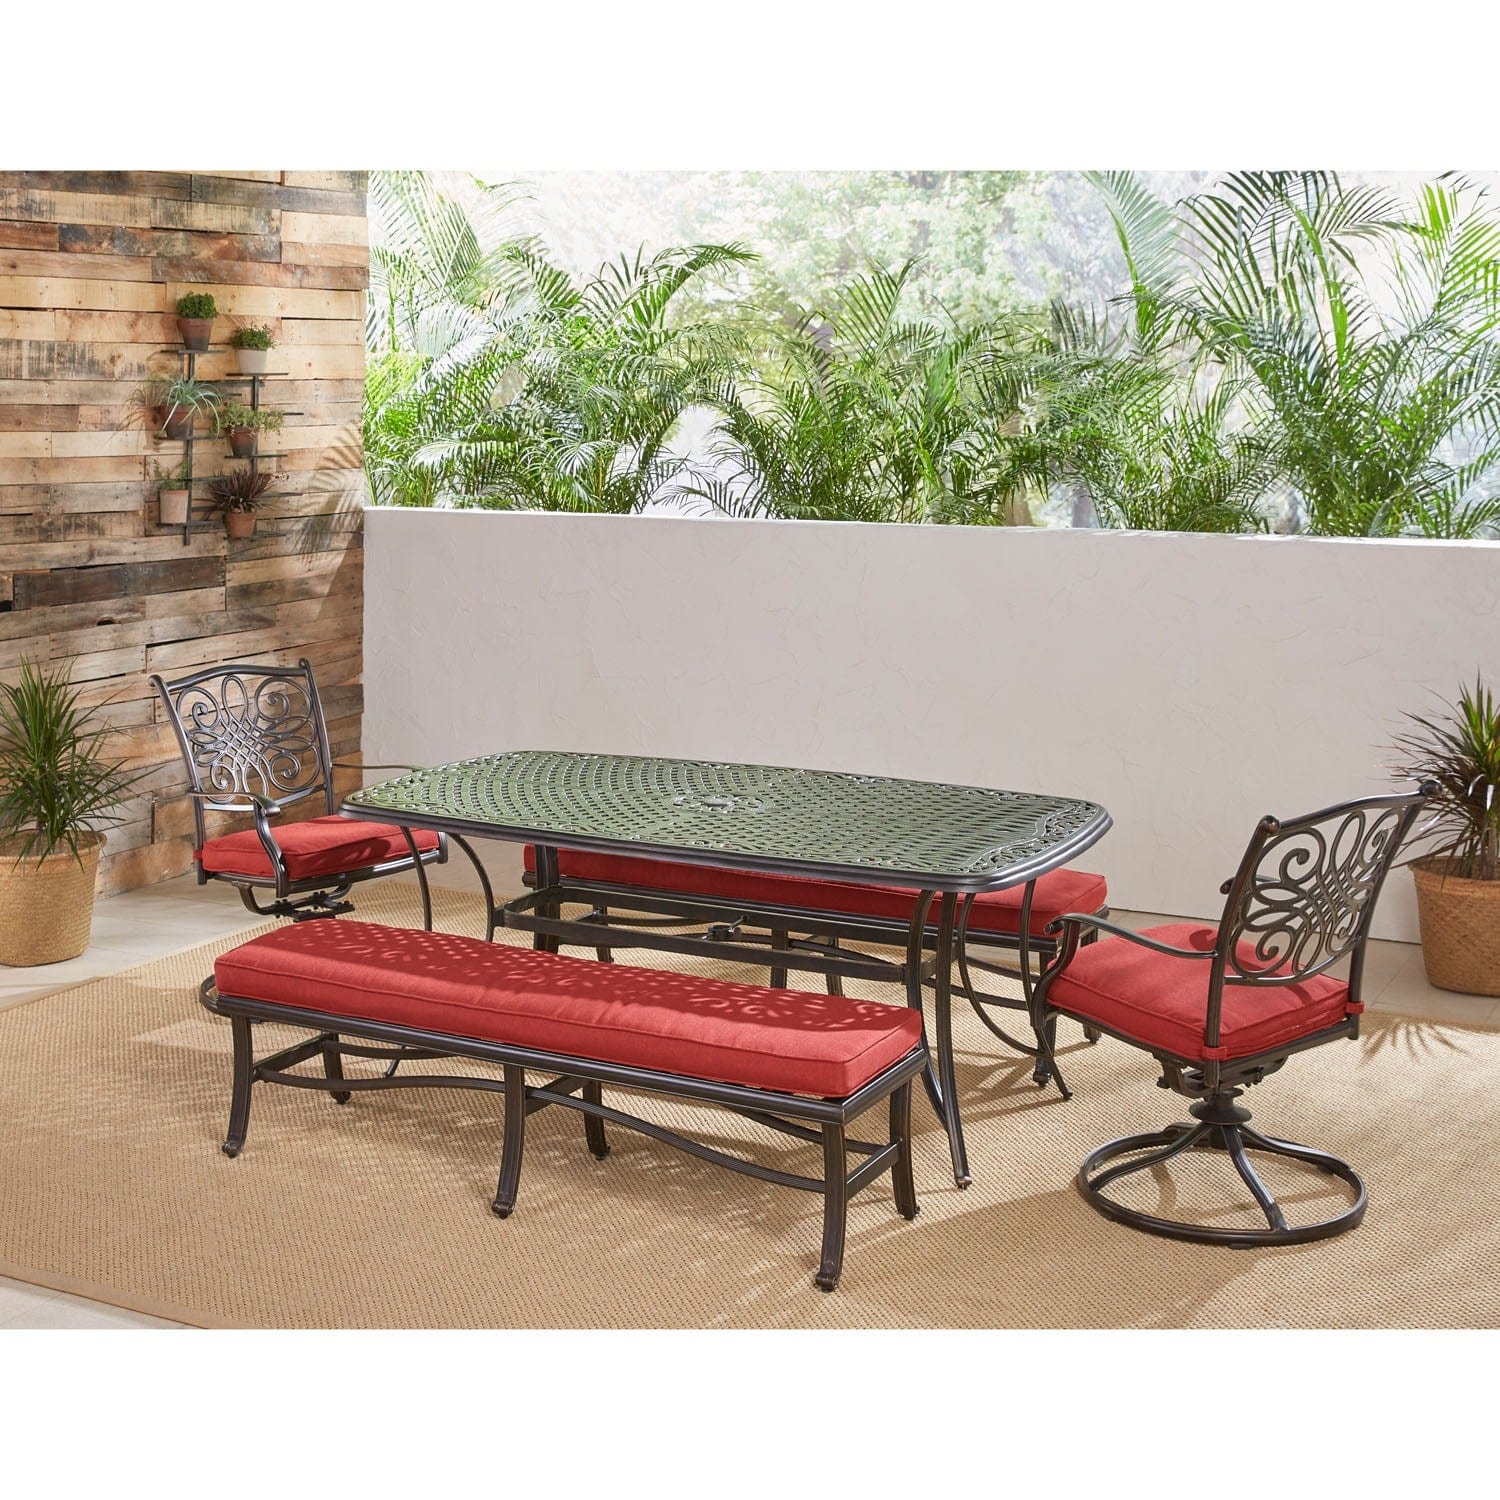 Hanover Outdoor Dining Set Hanover - Traditions 5-Piece Aluminium Frame Patio Dining Set in Red with 2 Swivel Rockers, 2 Cushioned Benches, and a 38" x 72" Cast-Top Dining Table | TRADDN5PCSW2BN-RED